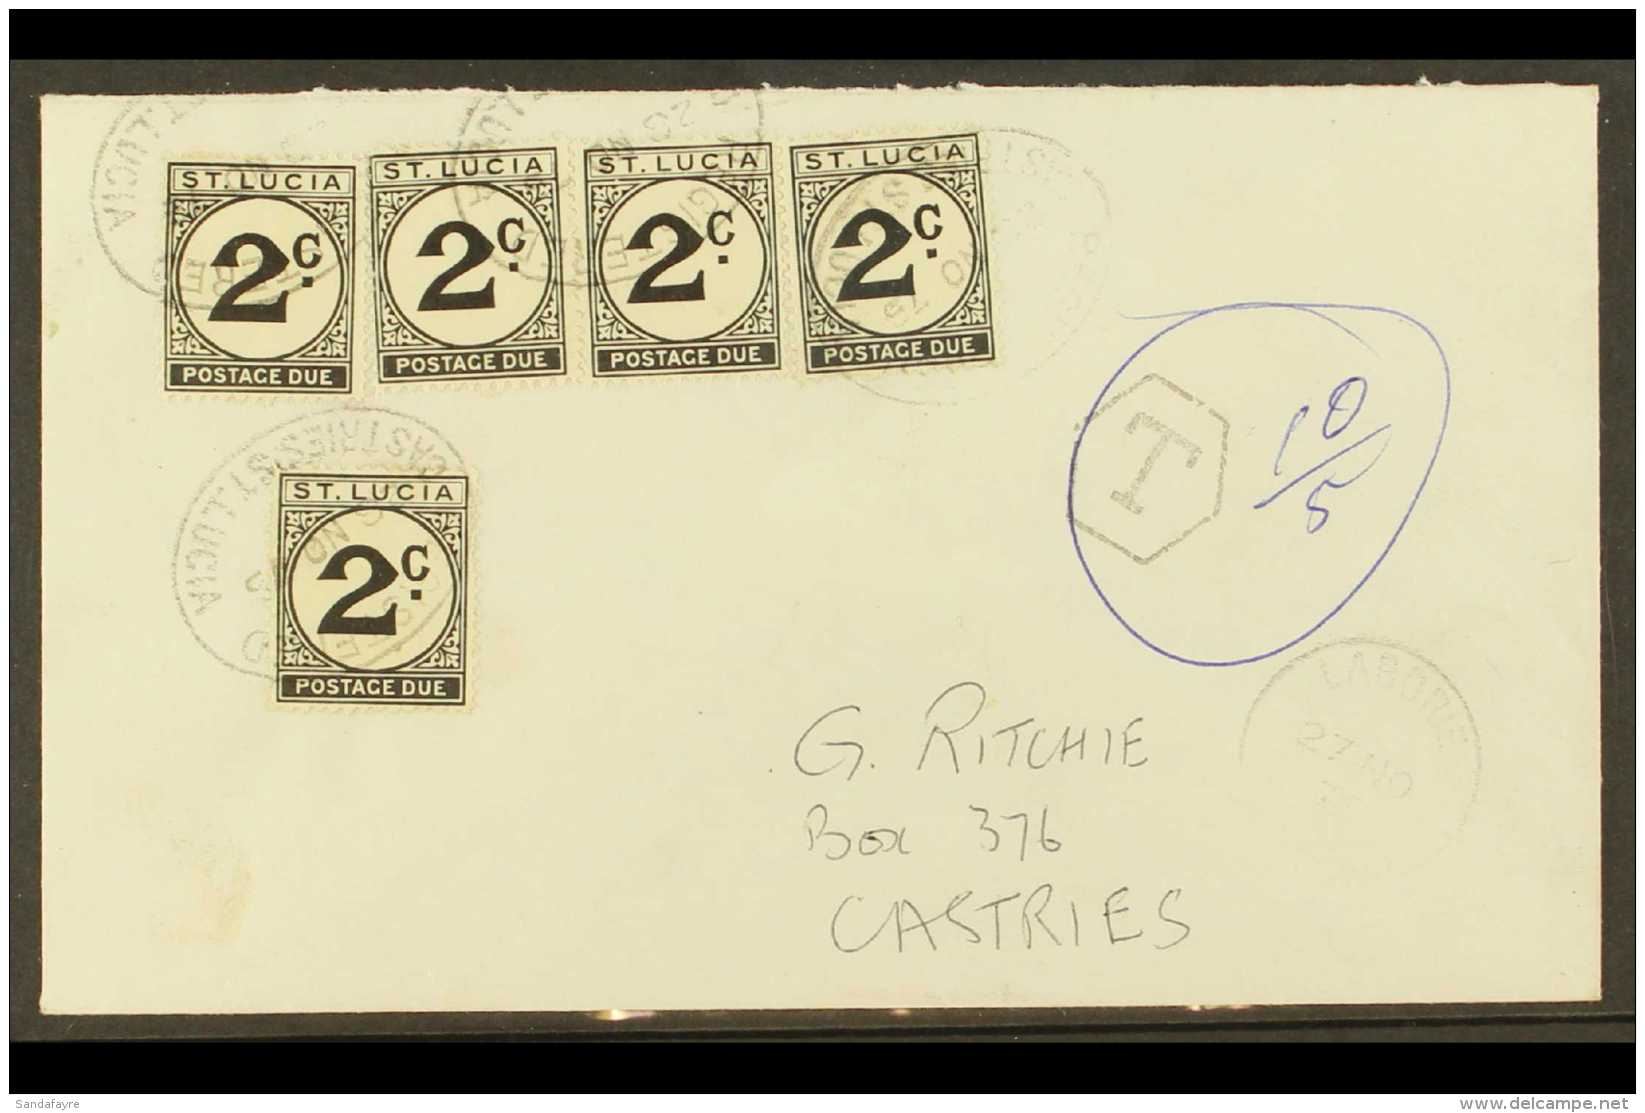 POSTAGE DUE 1975 (23 Nov) Stampless Local Cover Bearing Five 2c Postage Dues Tied Neat "Registered/Castries St... - Ste Lucie (...-1978)